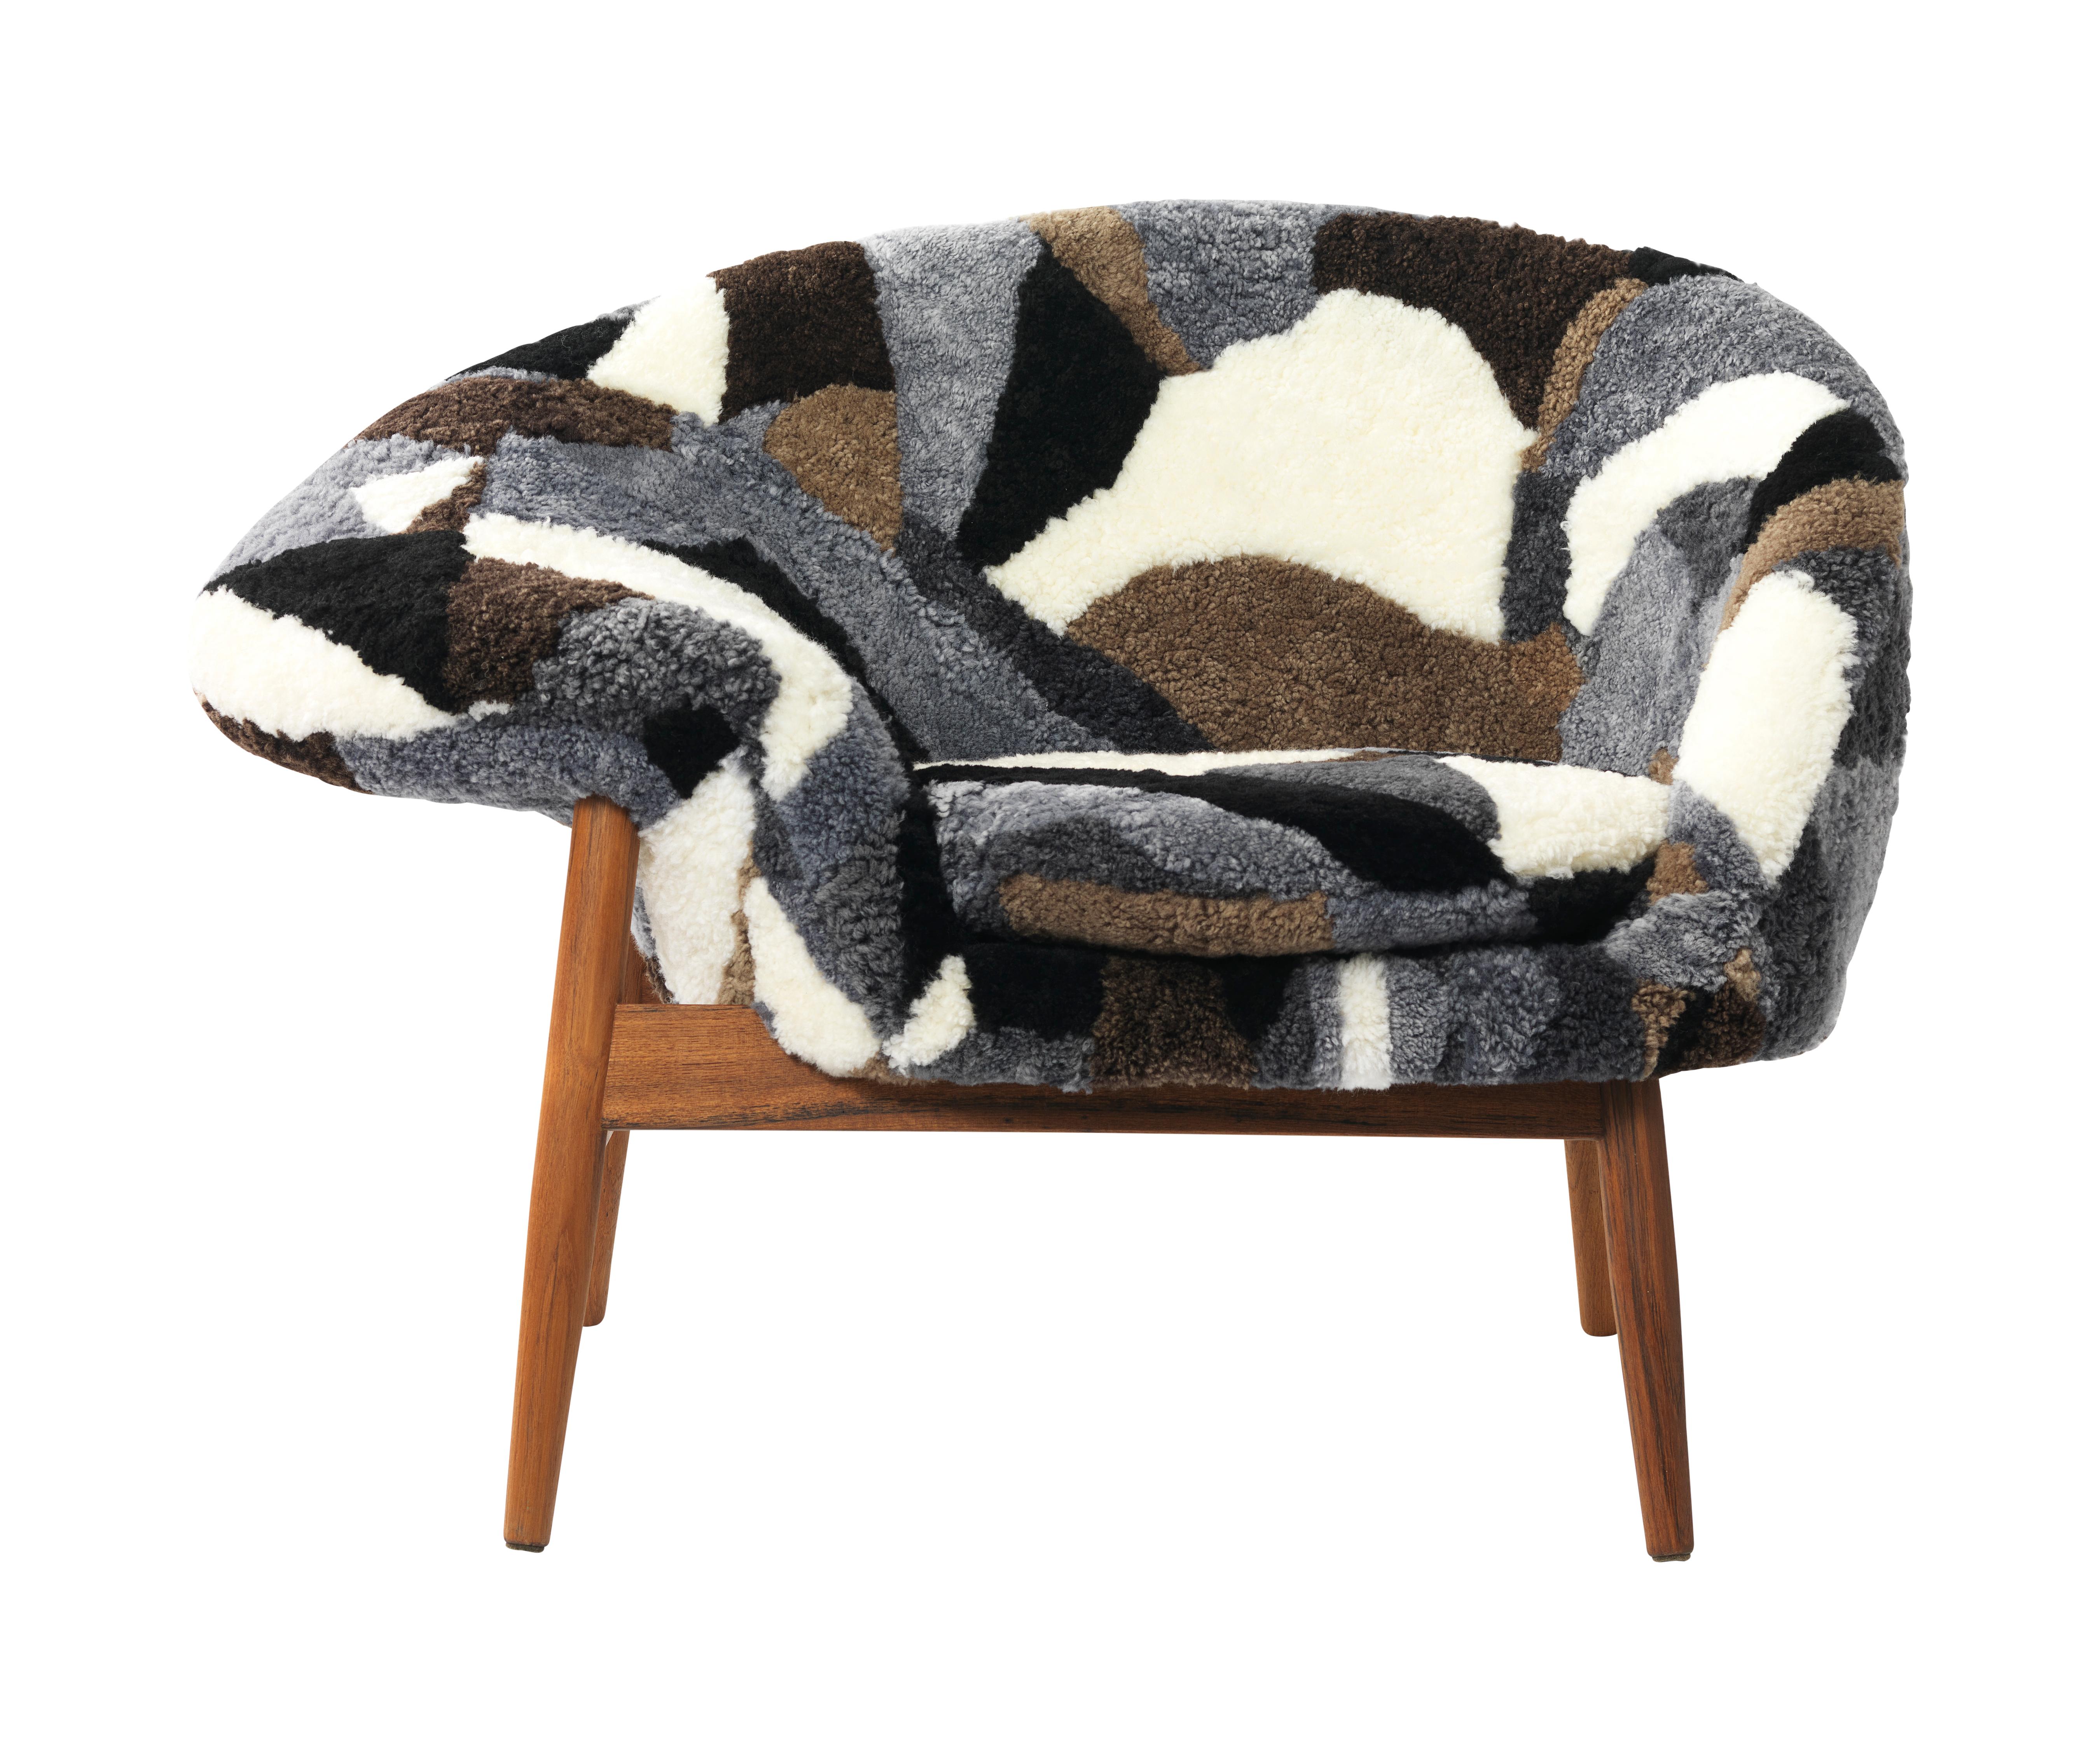 For Sale: Multi (Sheep Mix) Fried Egg Chair Sheep Chair, by Hans Olsen from Warm Nordic 2